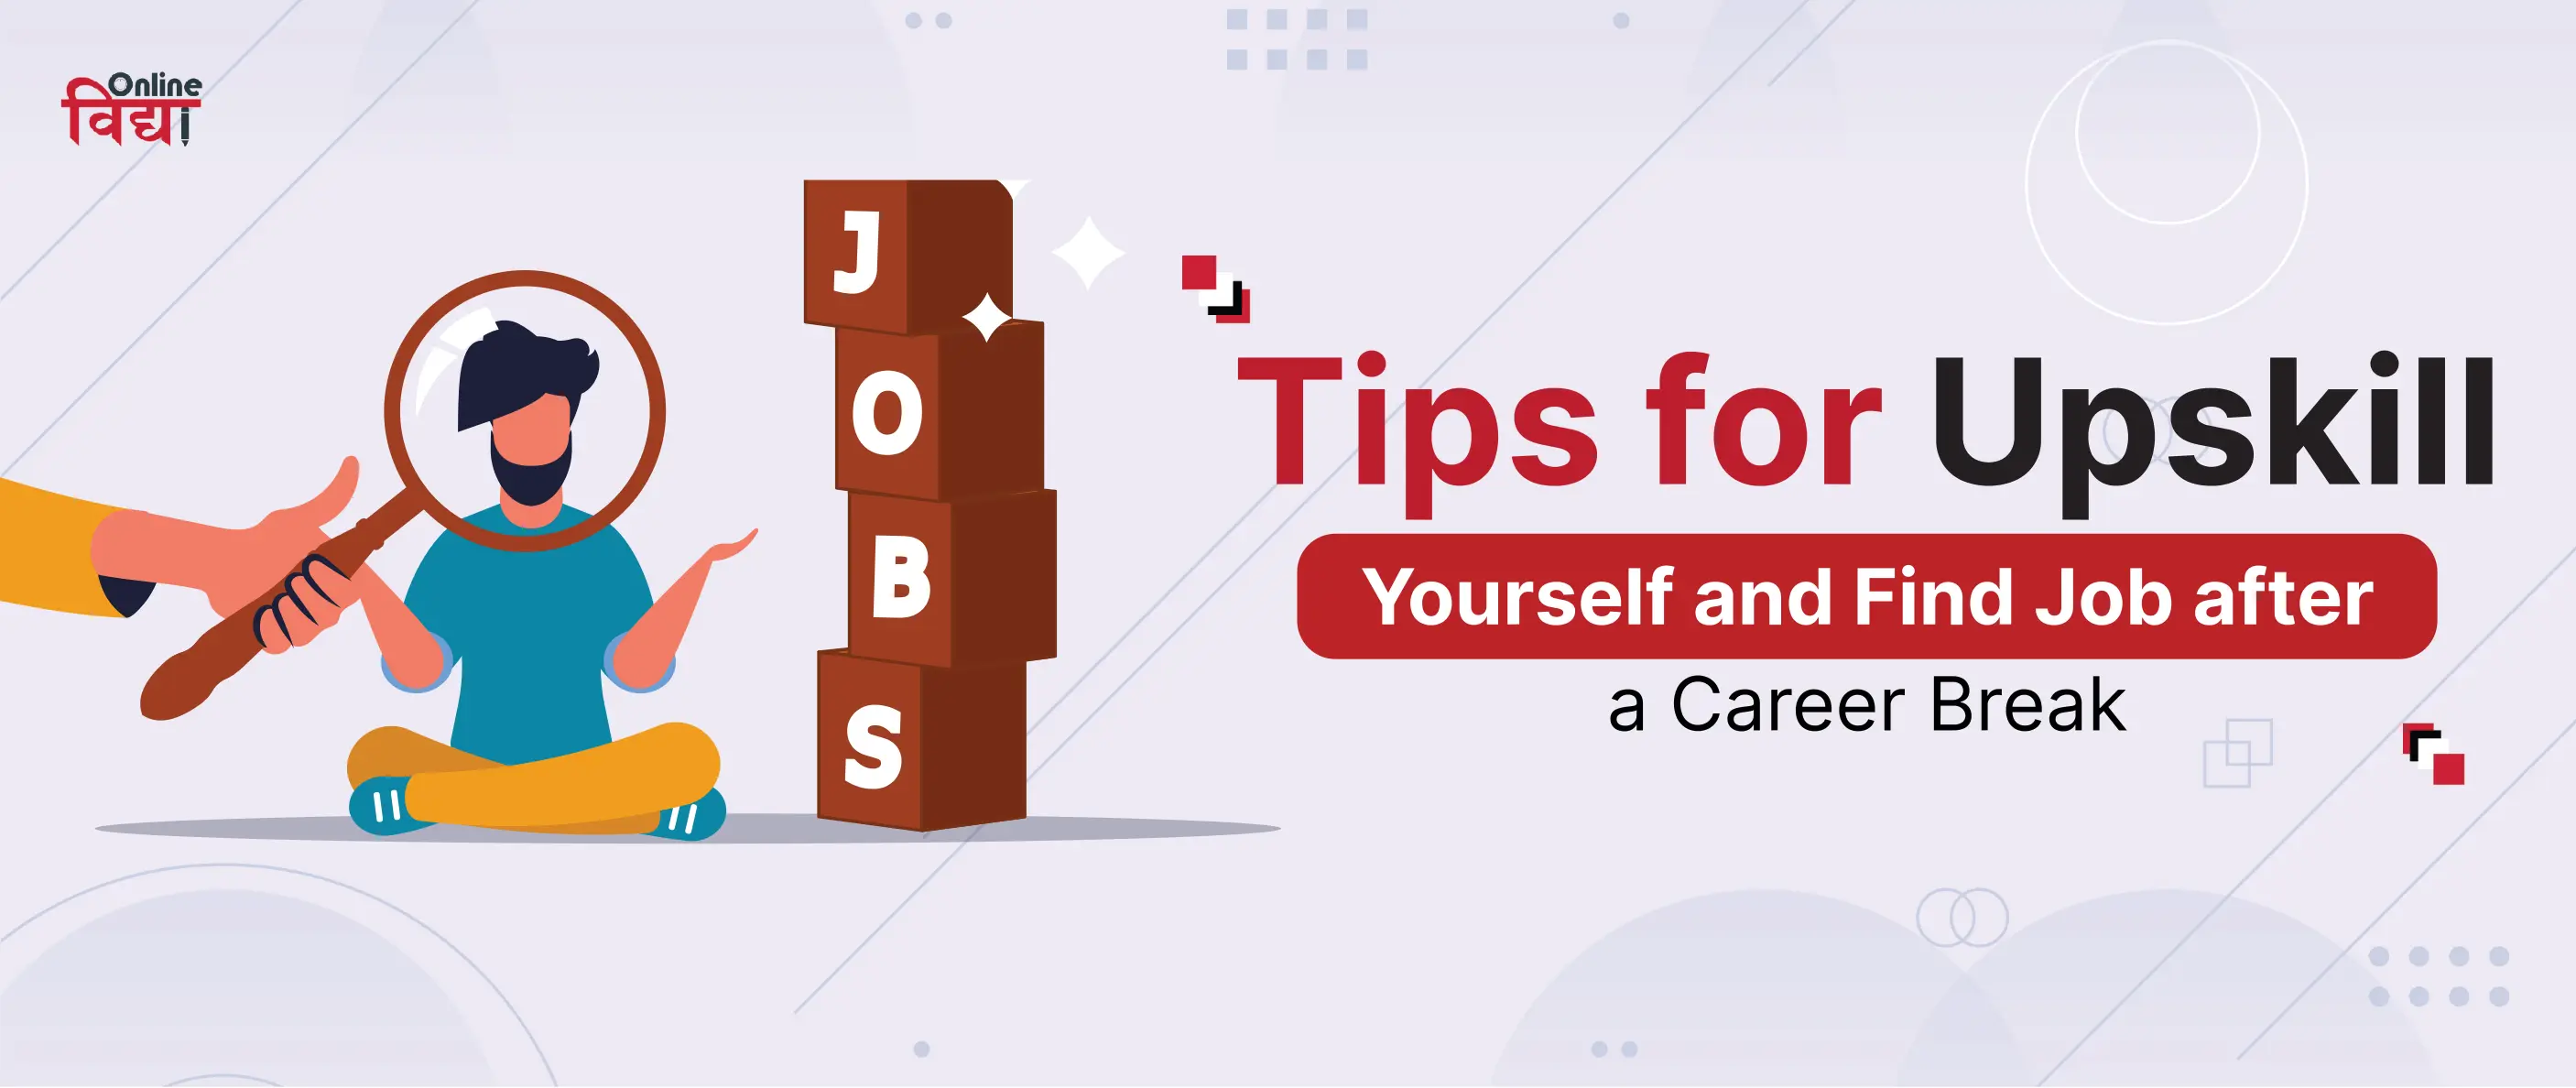 Tips for Upskill Yourself and Find Job after a Career Break